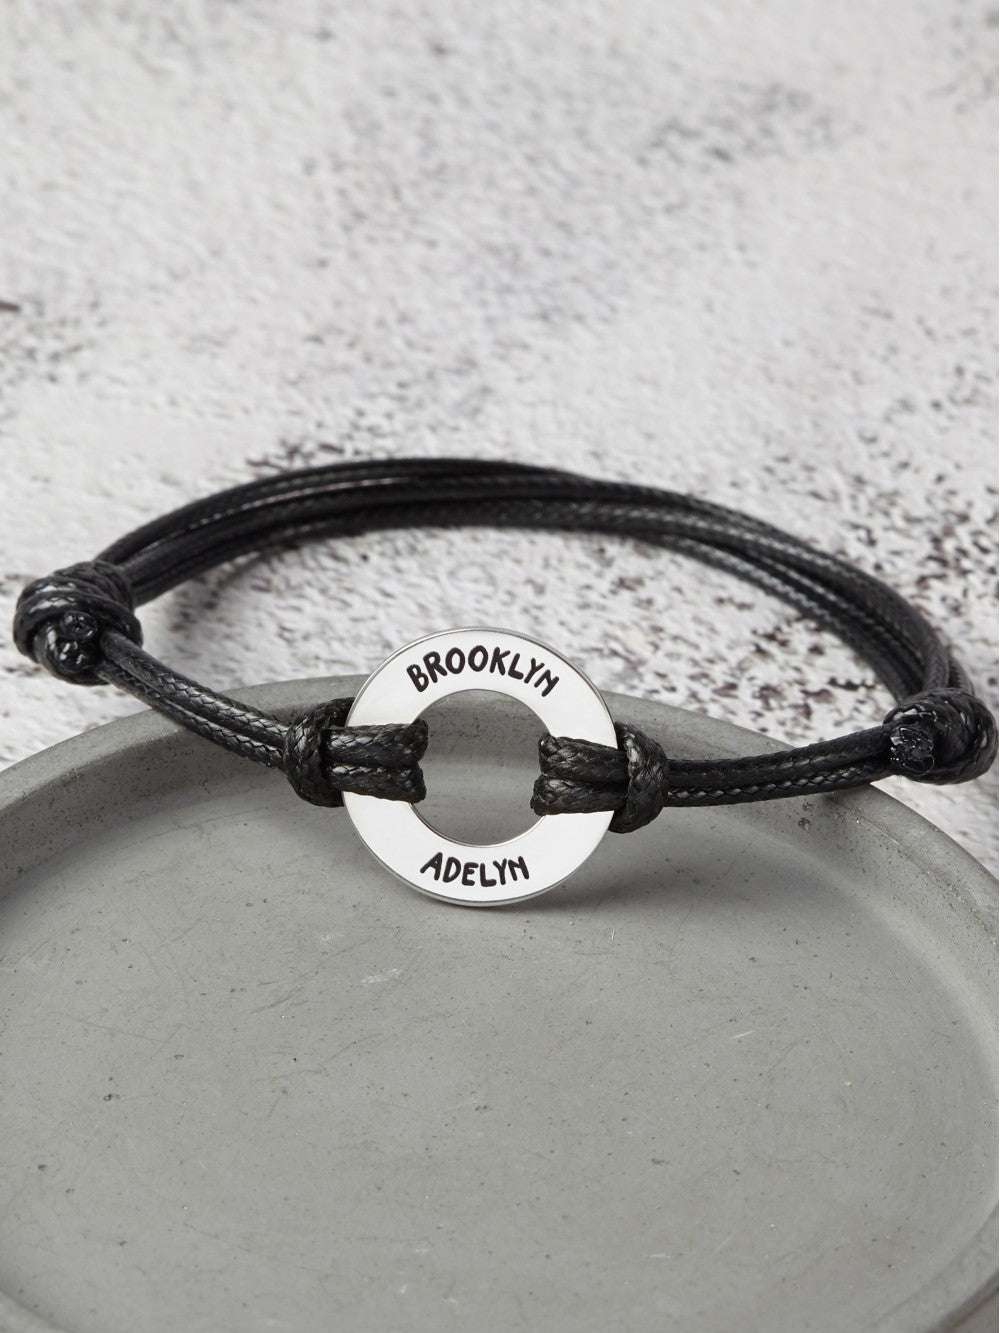 Personalized Leather Bracelet with Kids' Names for Father's Day Gift - Bracelets - Bijou Her -  -  - 